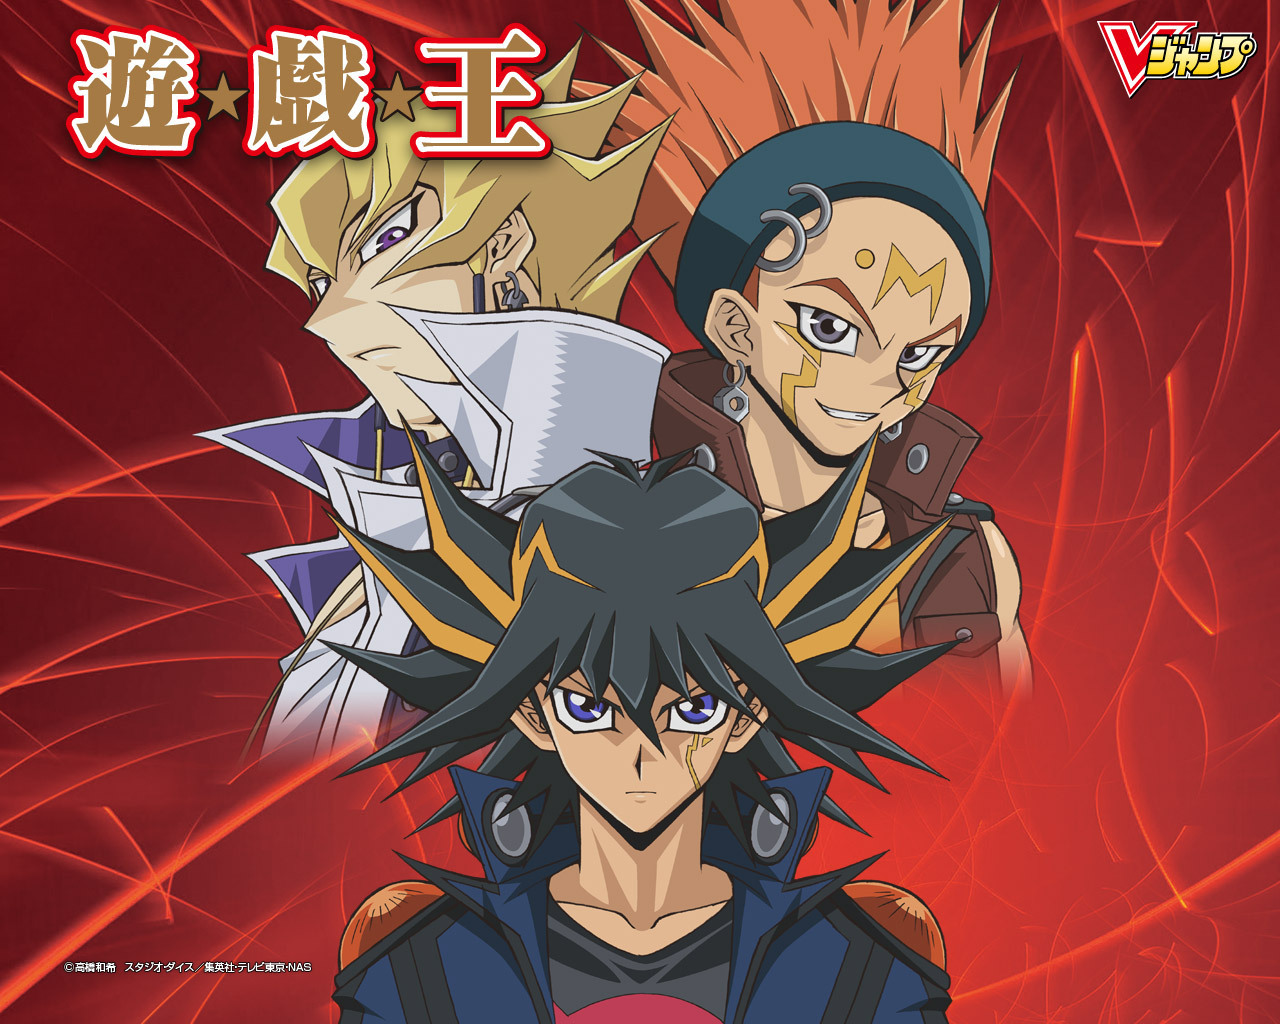 yu gi oh 5ds opening